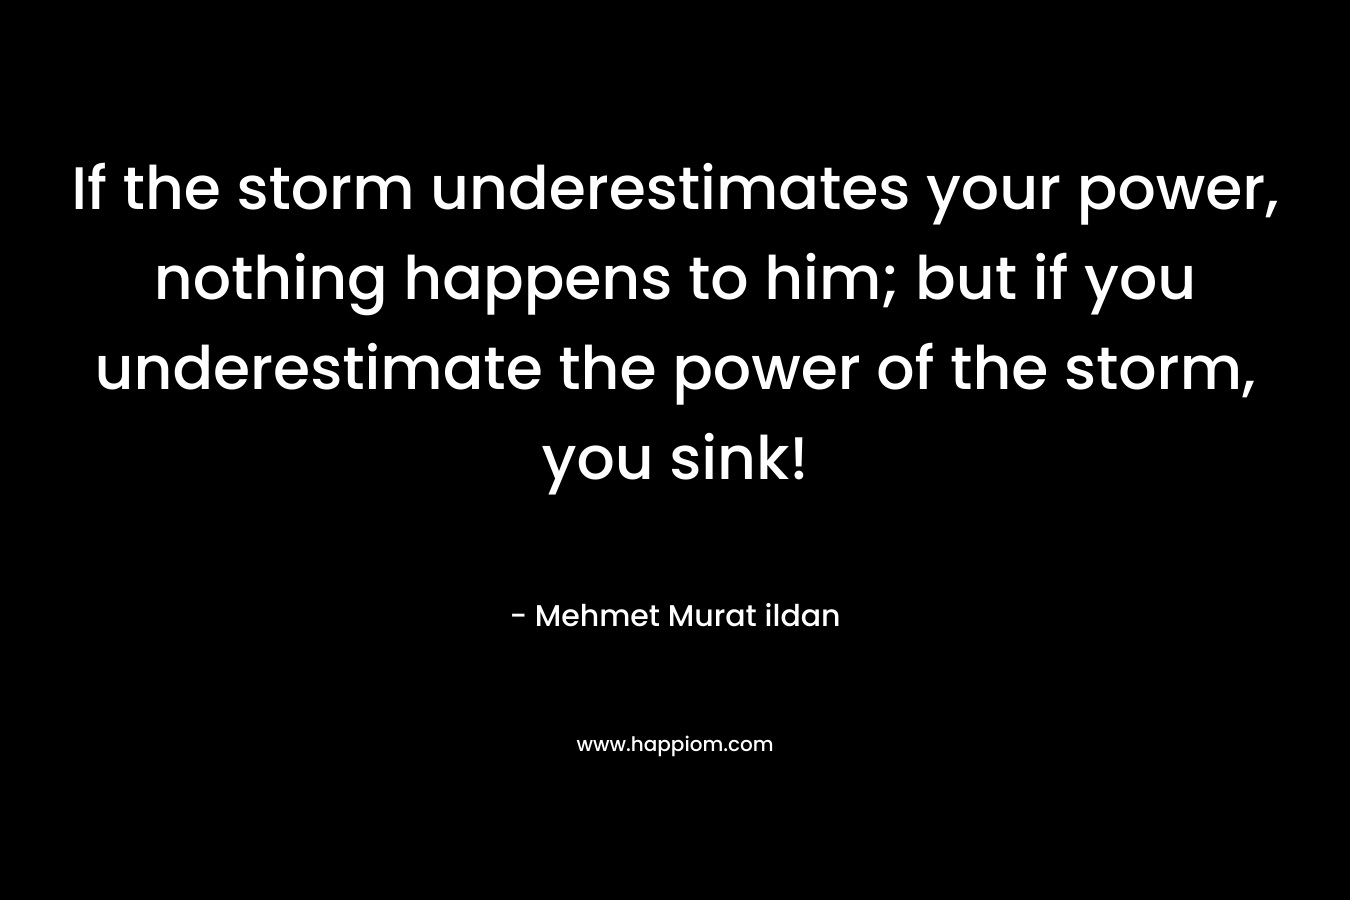 If the storm underestimates your power, nothing happens to him; but if you underestimate the power of the storm, you sink!